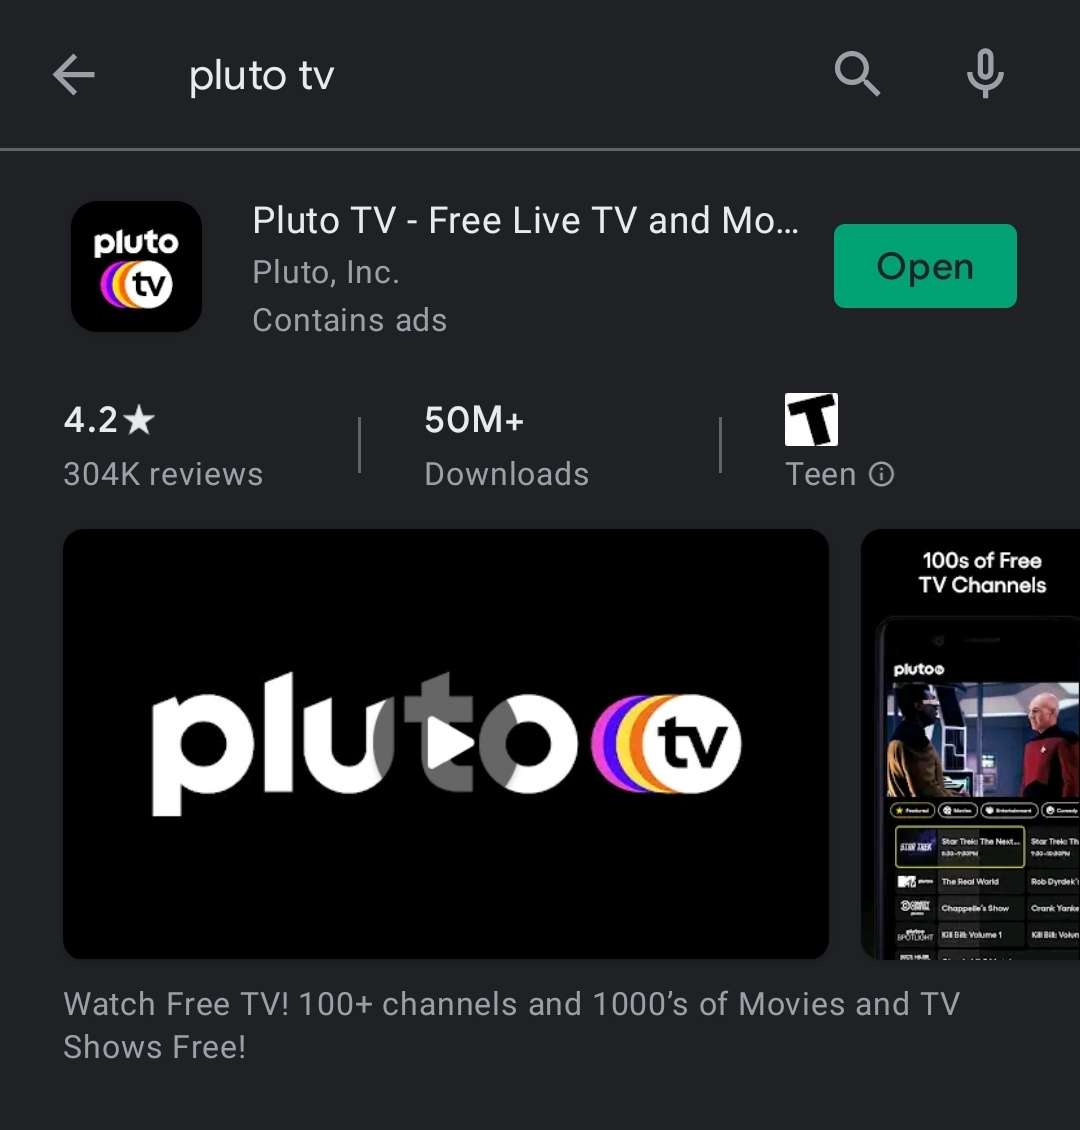 How to Install Pluto TV